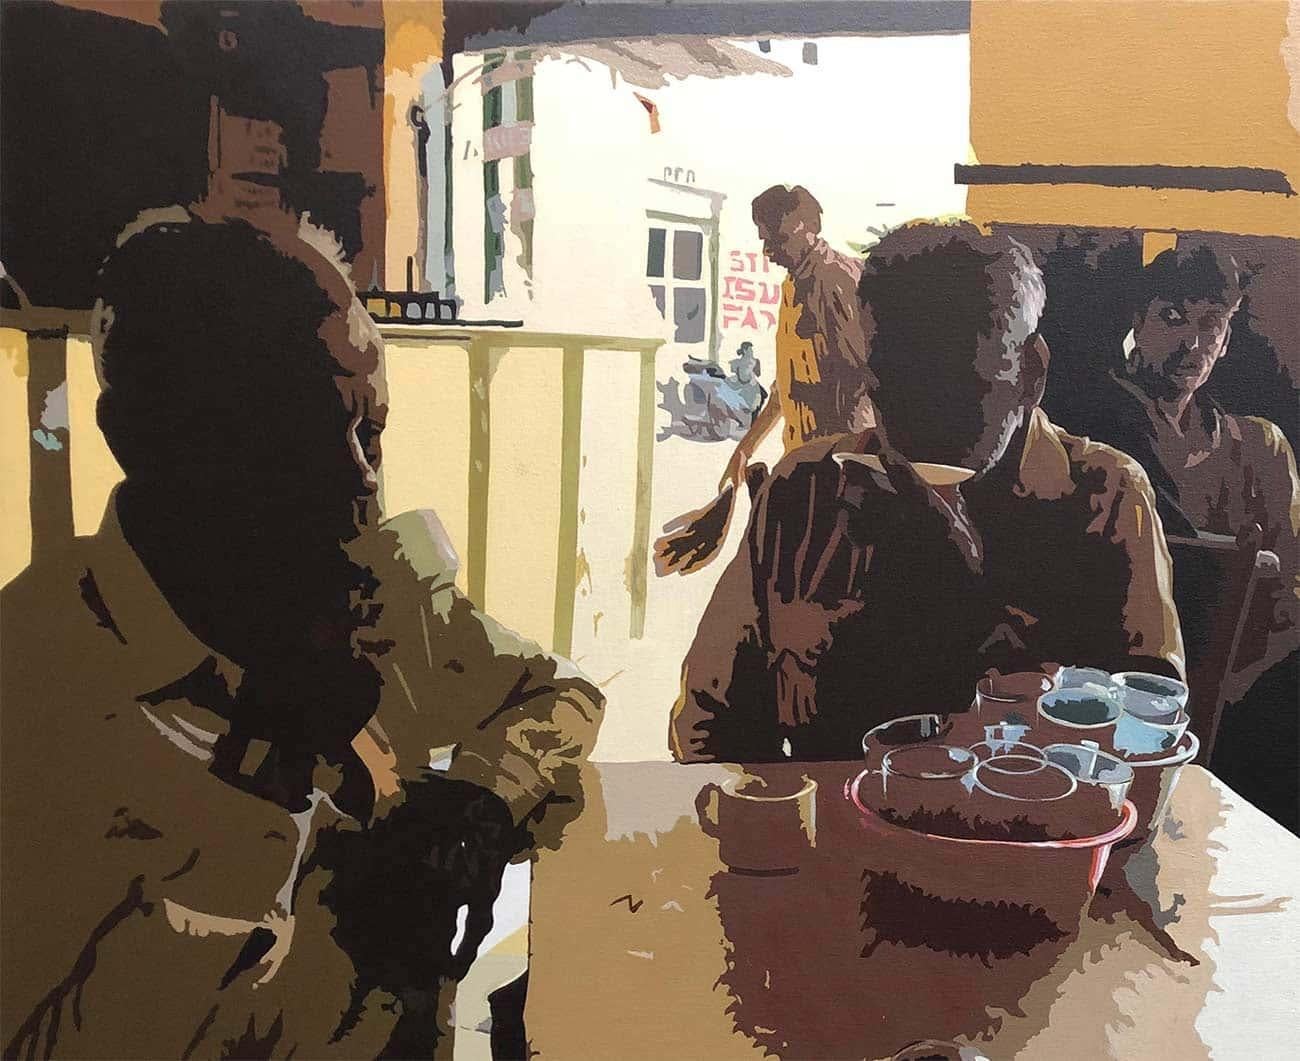 Fawad Tamakanat - Cafe - 36 x 48 inches (unframed size)
Acrylic on Canvas
Inclusive of shipment in roll form.

Fawad Tamkanat, from Hyderabad participated with his slightly older works. One in which he is exploring the raging intrusion of technology